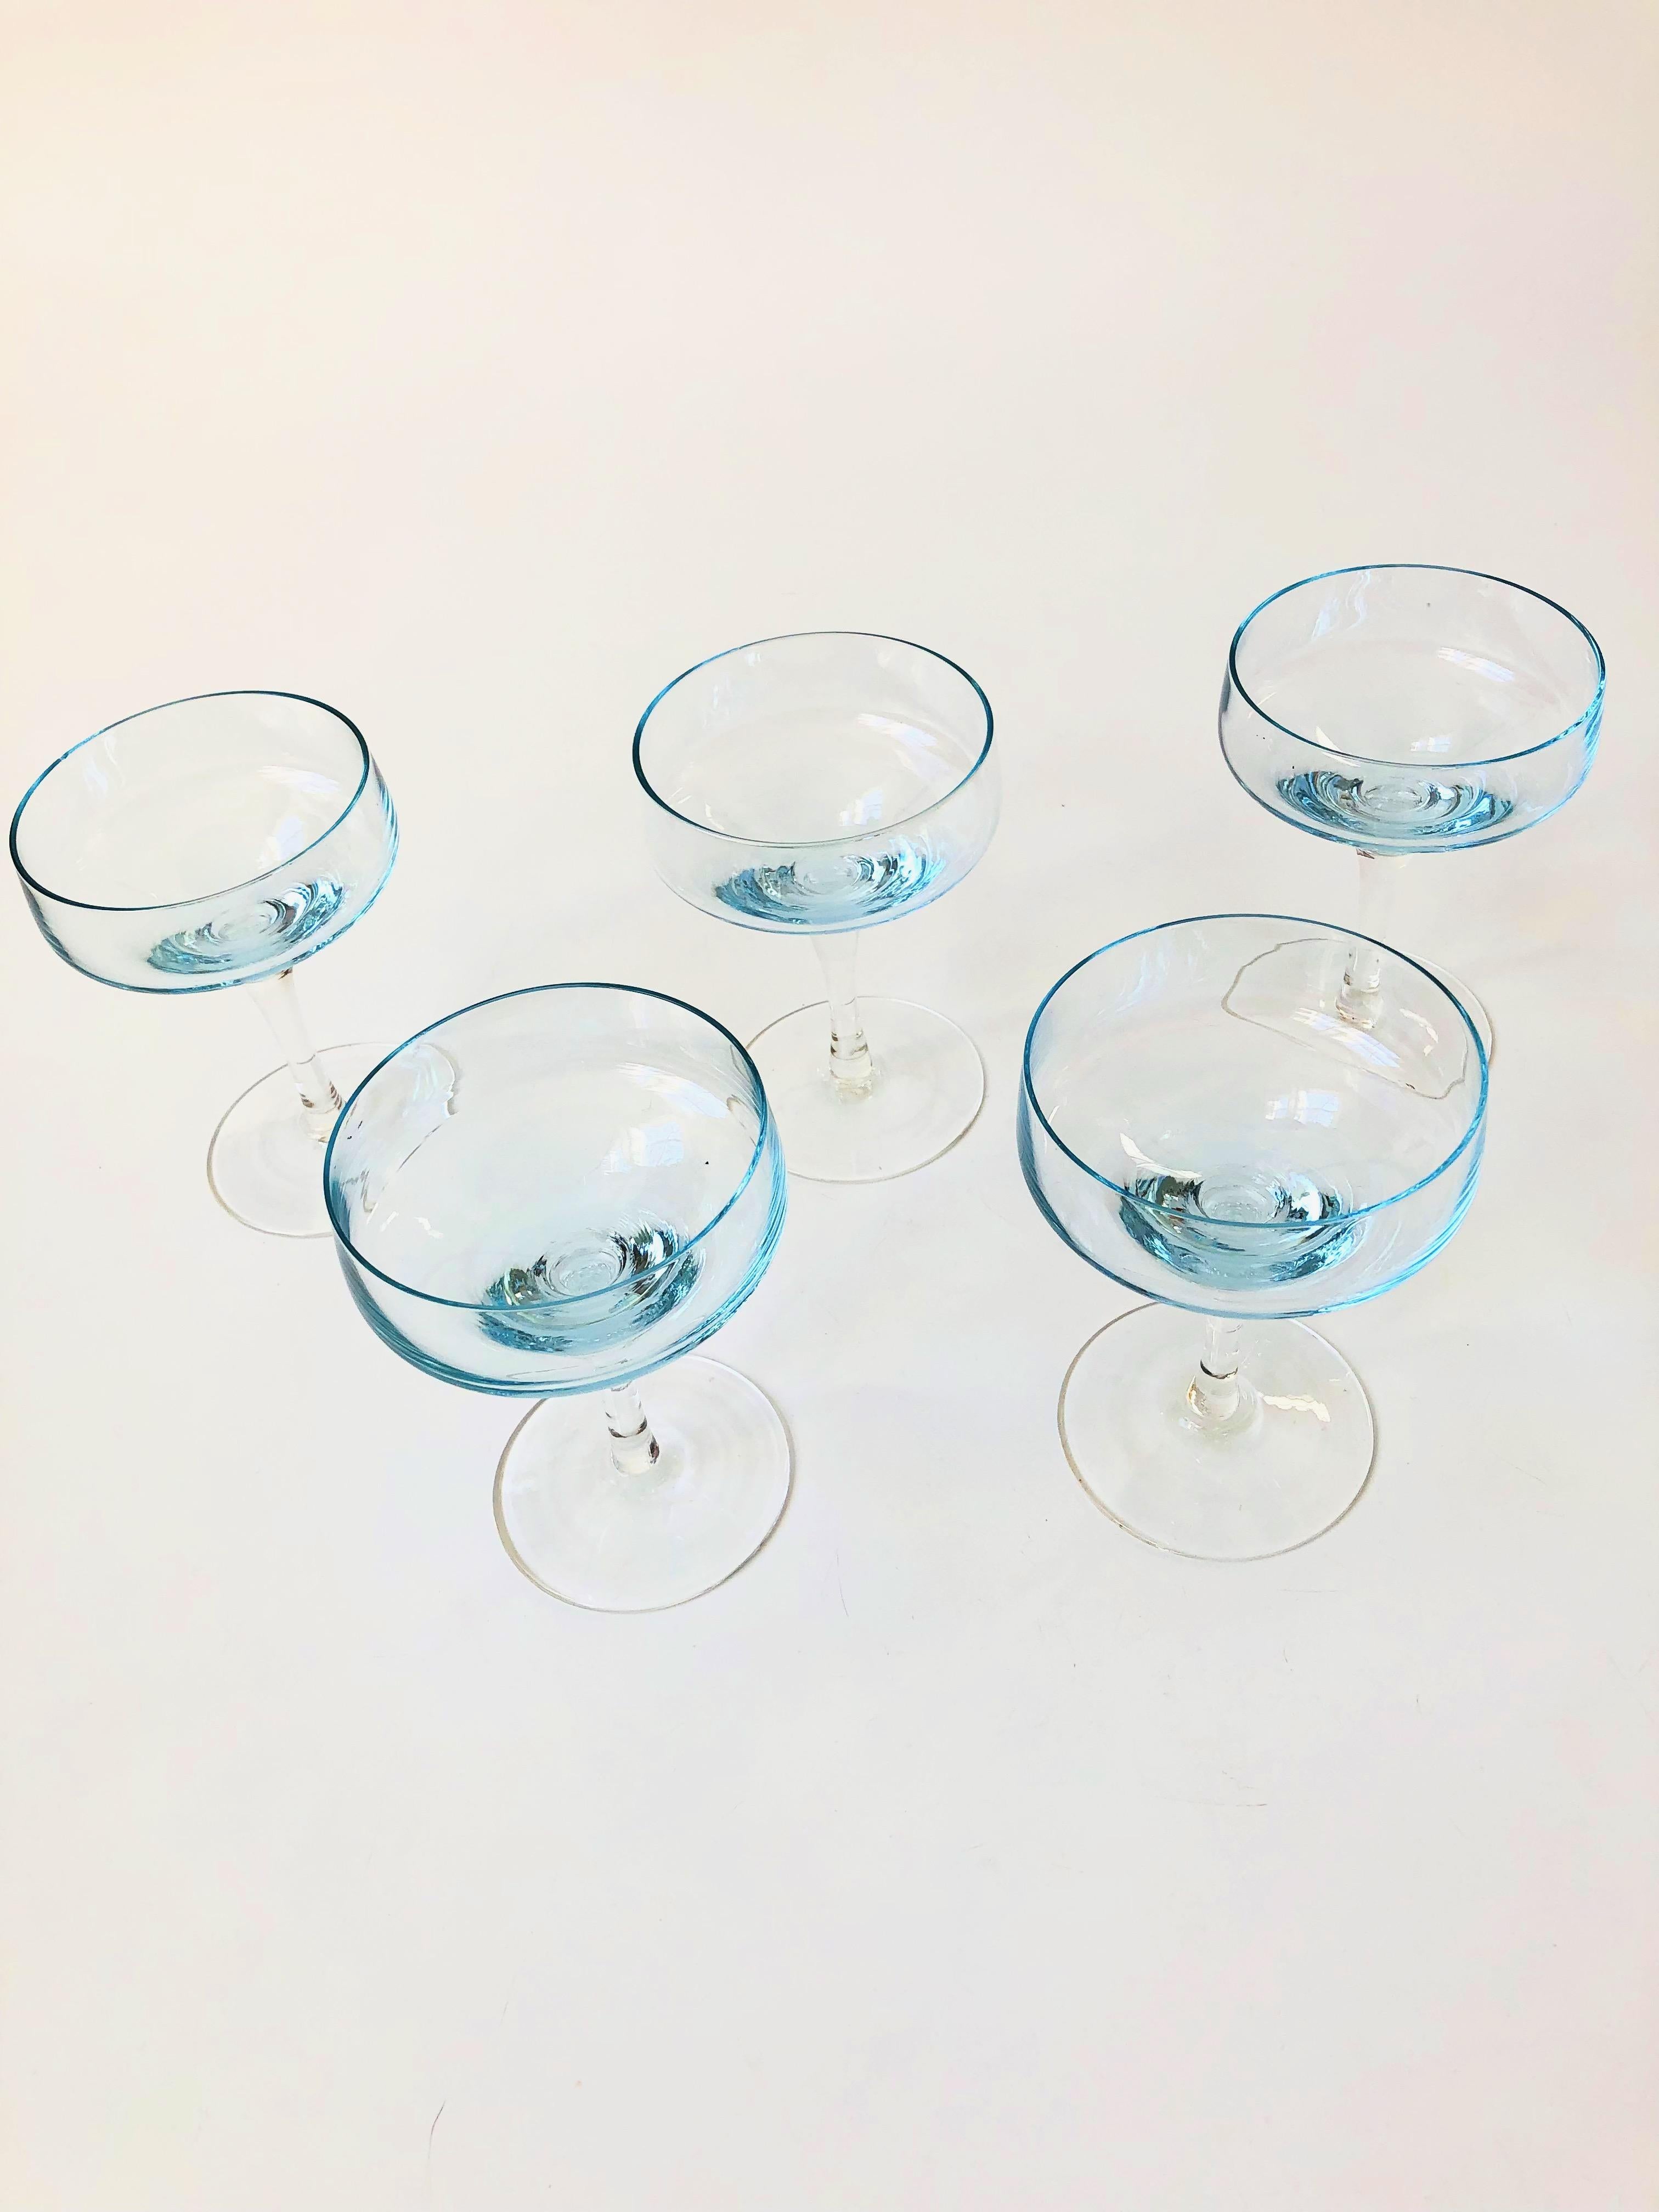 A set of 5 vintage coupe cocktail glasses in an elegant mid century shape. Each piece has been made with a light blue top and clear stem. Perfect for champagne.
 